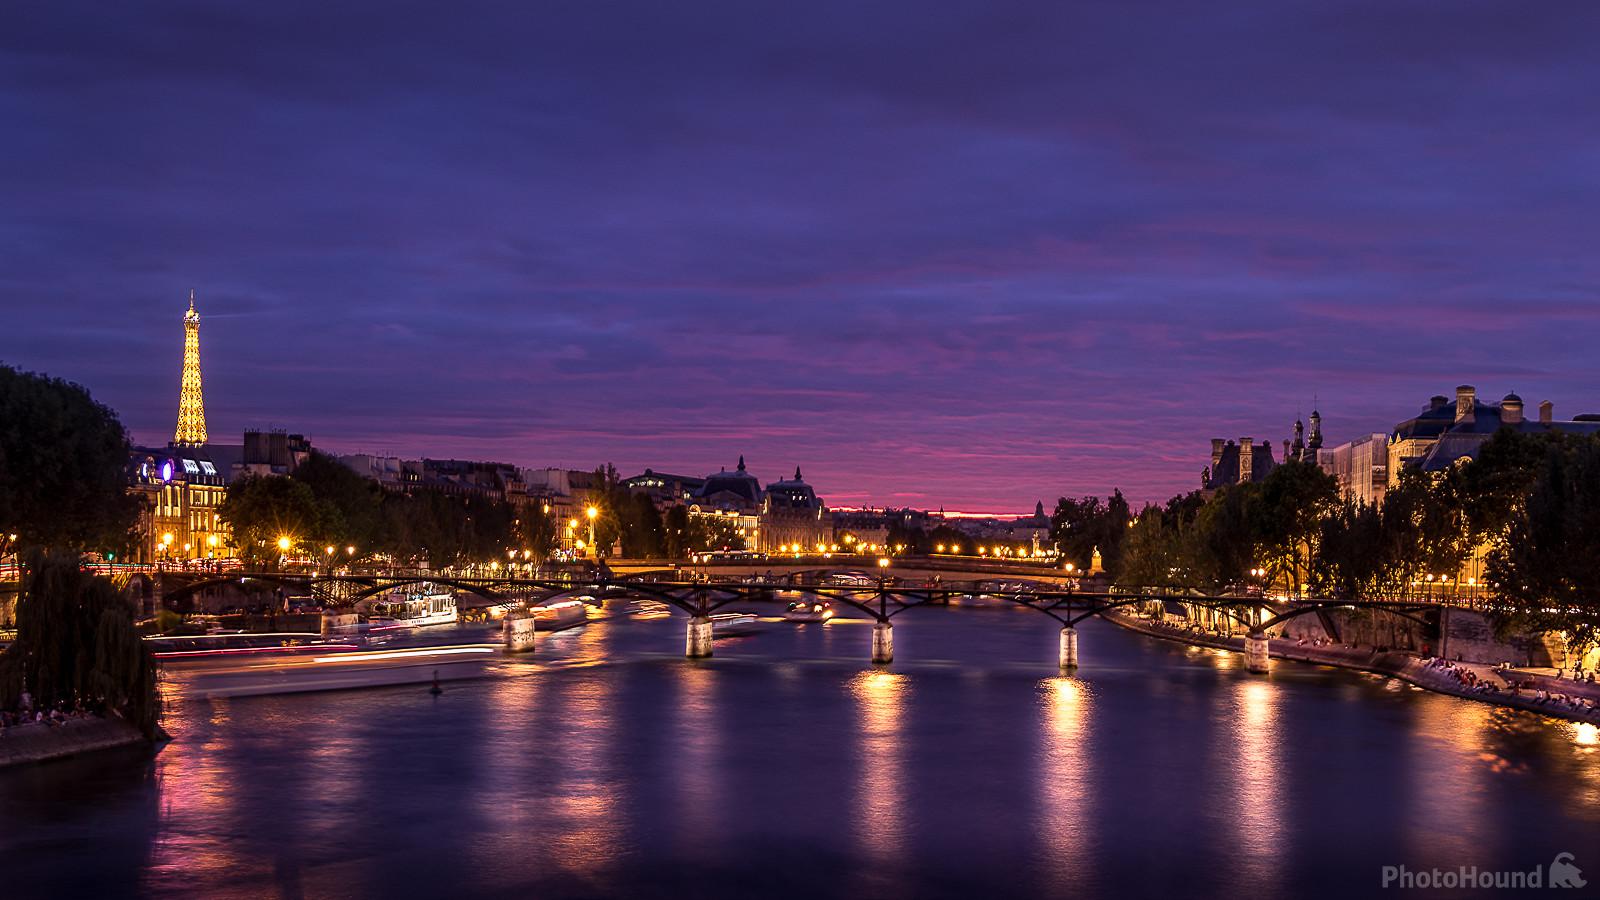 Image of The Seine seen from Pont Neuf by Frédéric Monin